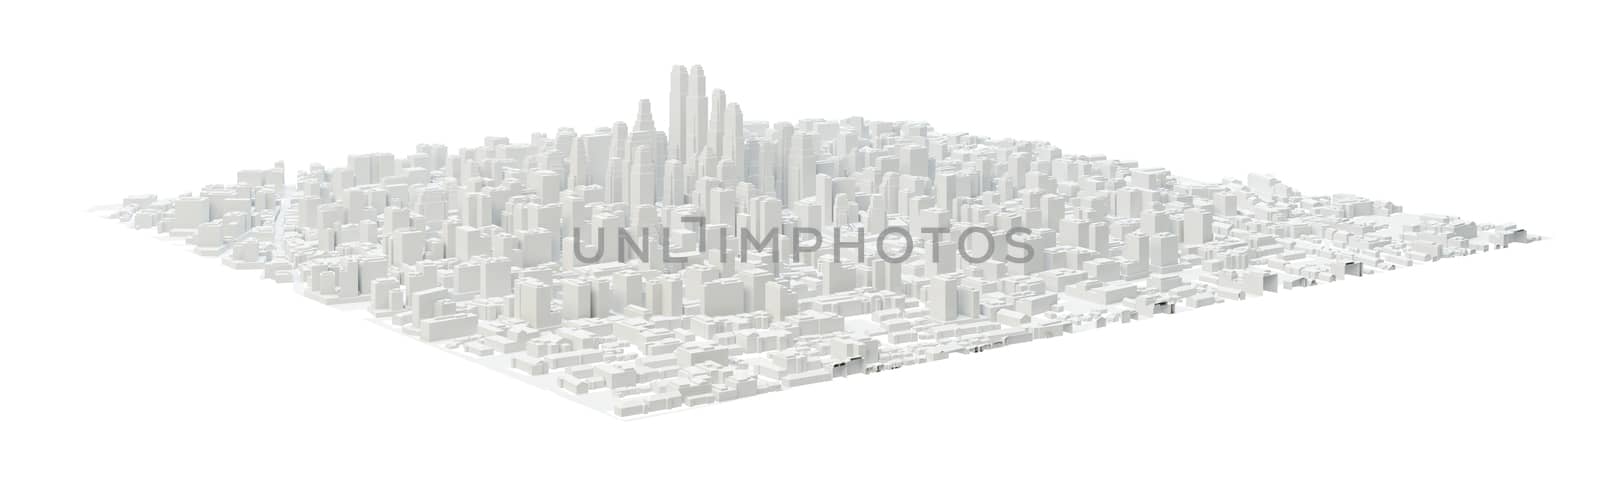 White City Buildings by cherezoff